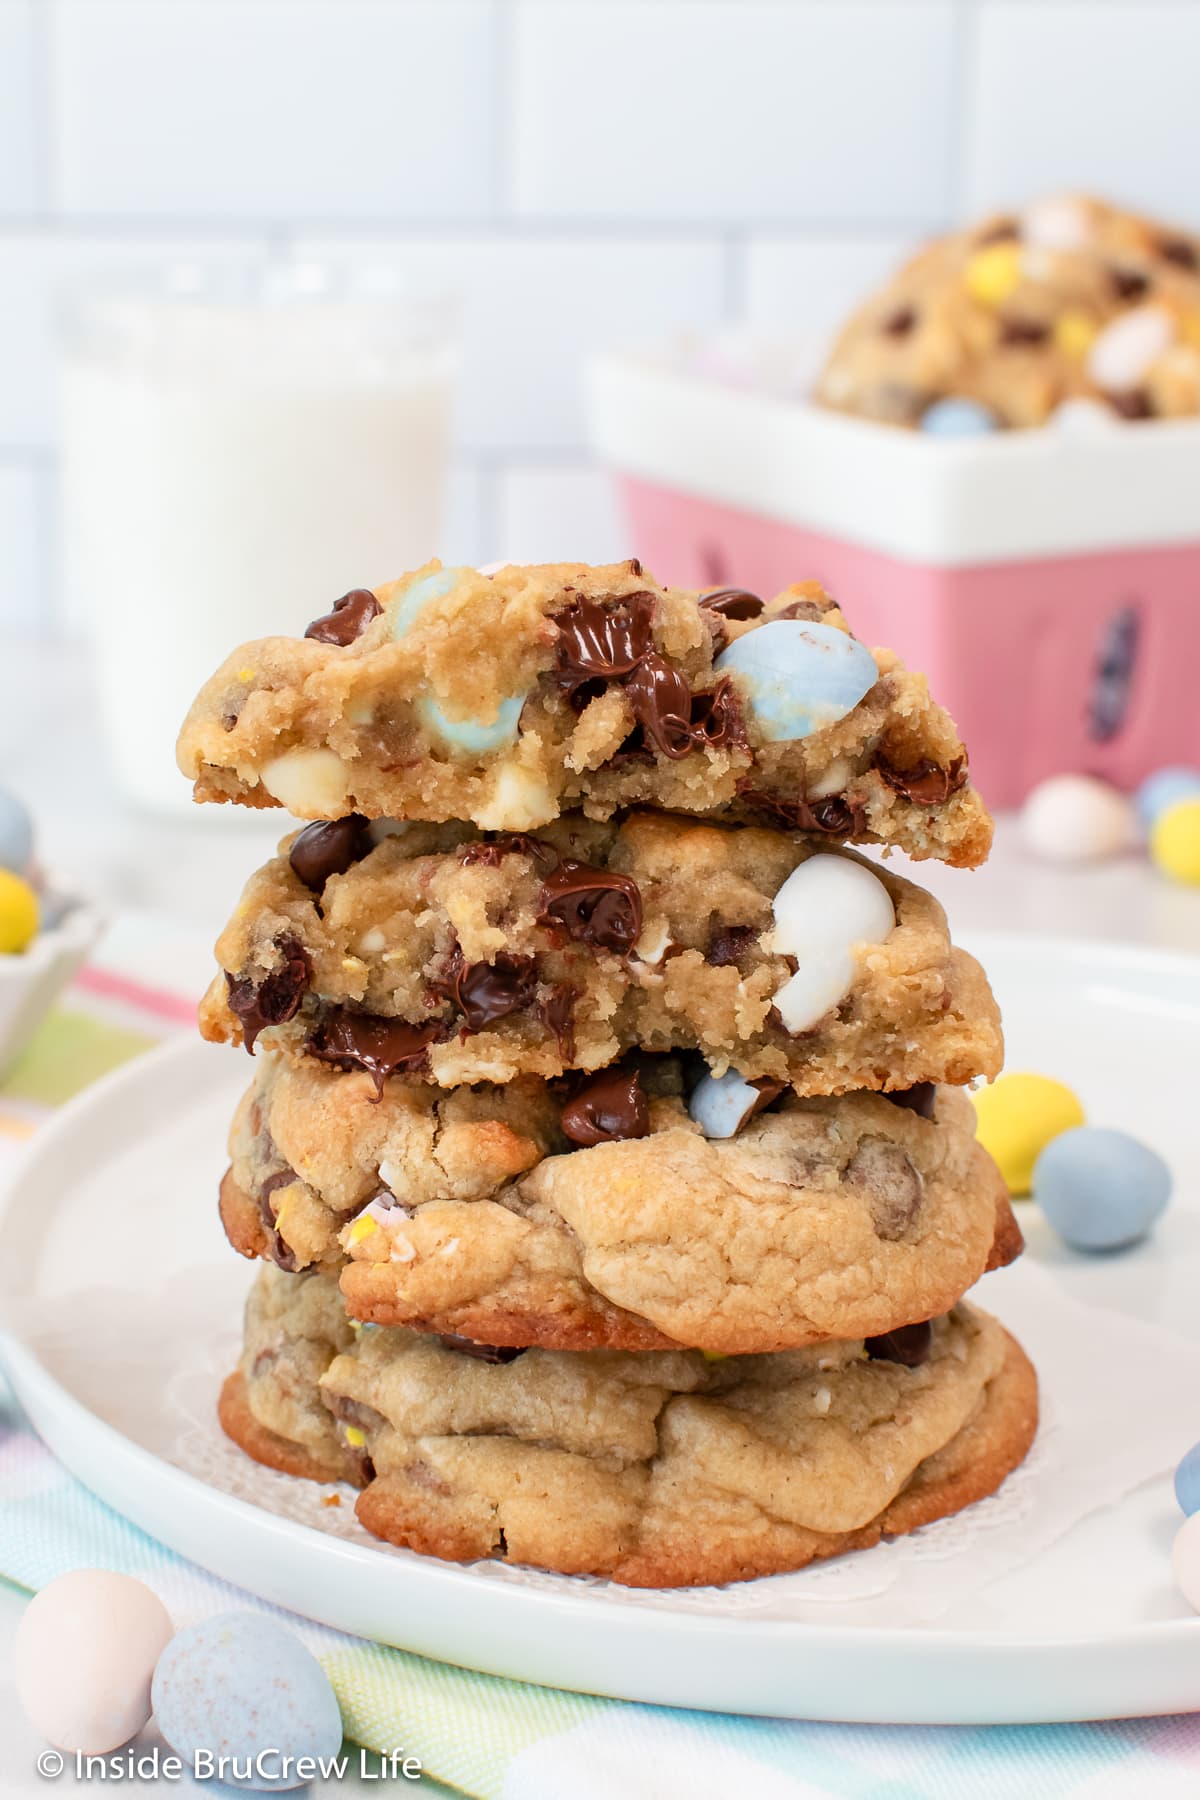 A stack of cookies showing the gooey chocolate insides of the top one.